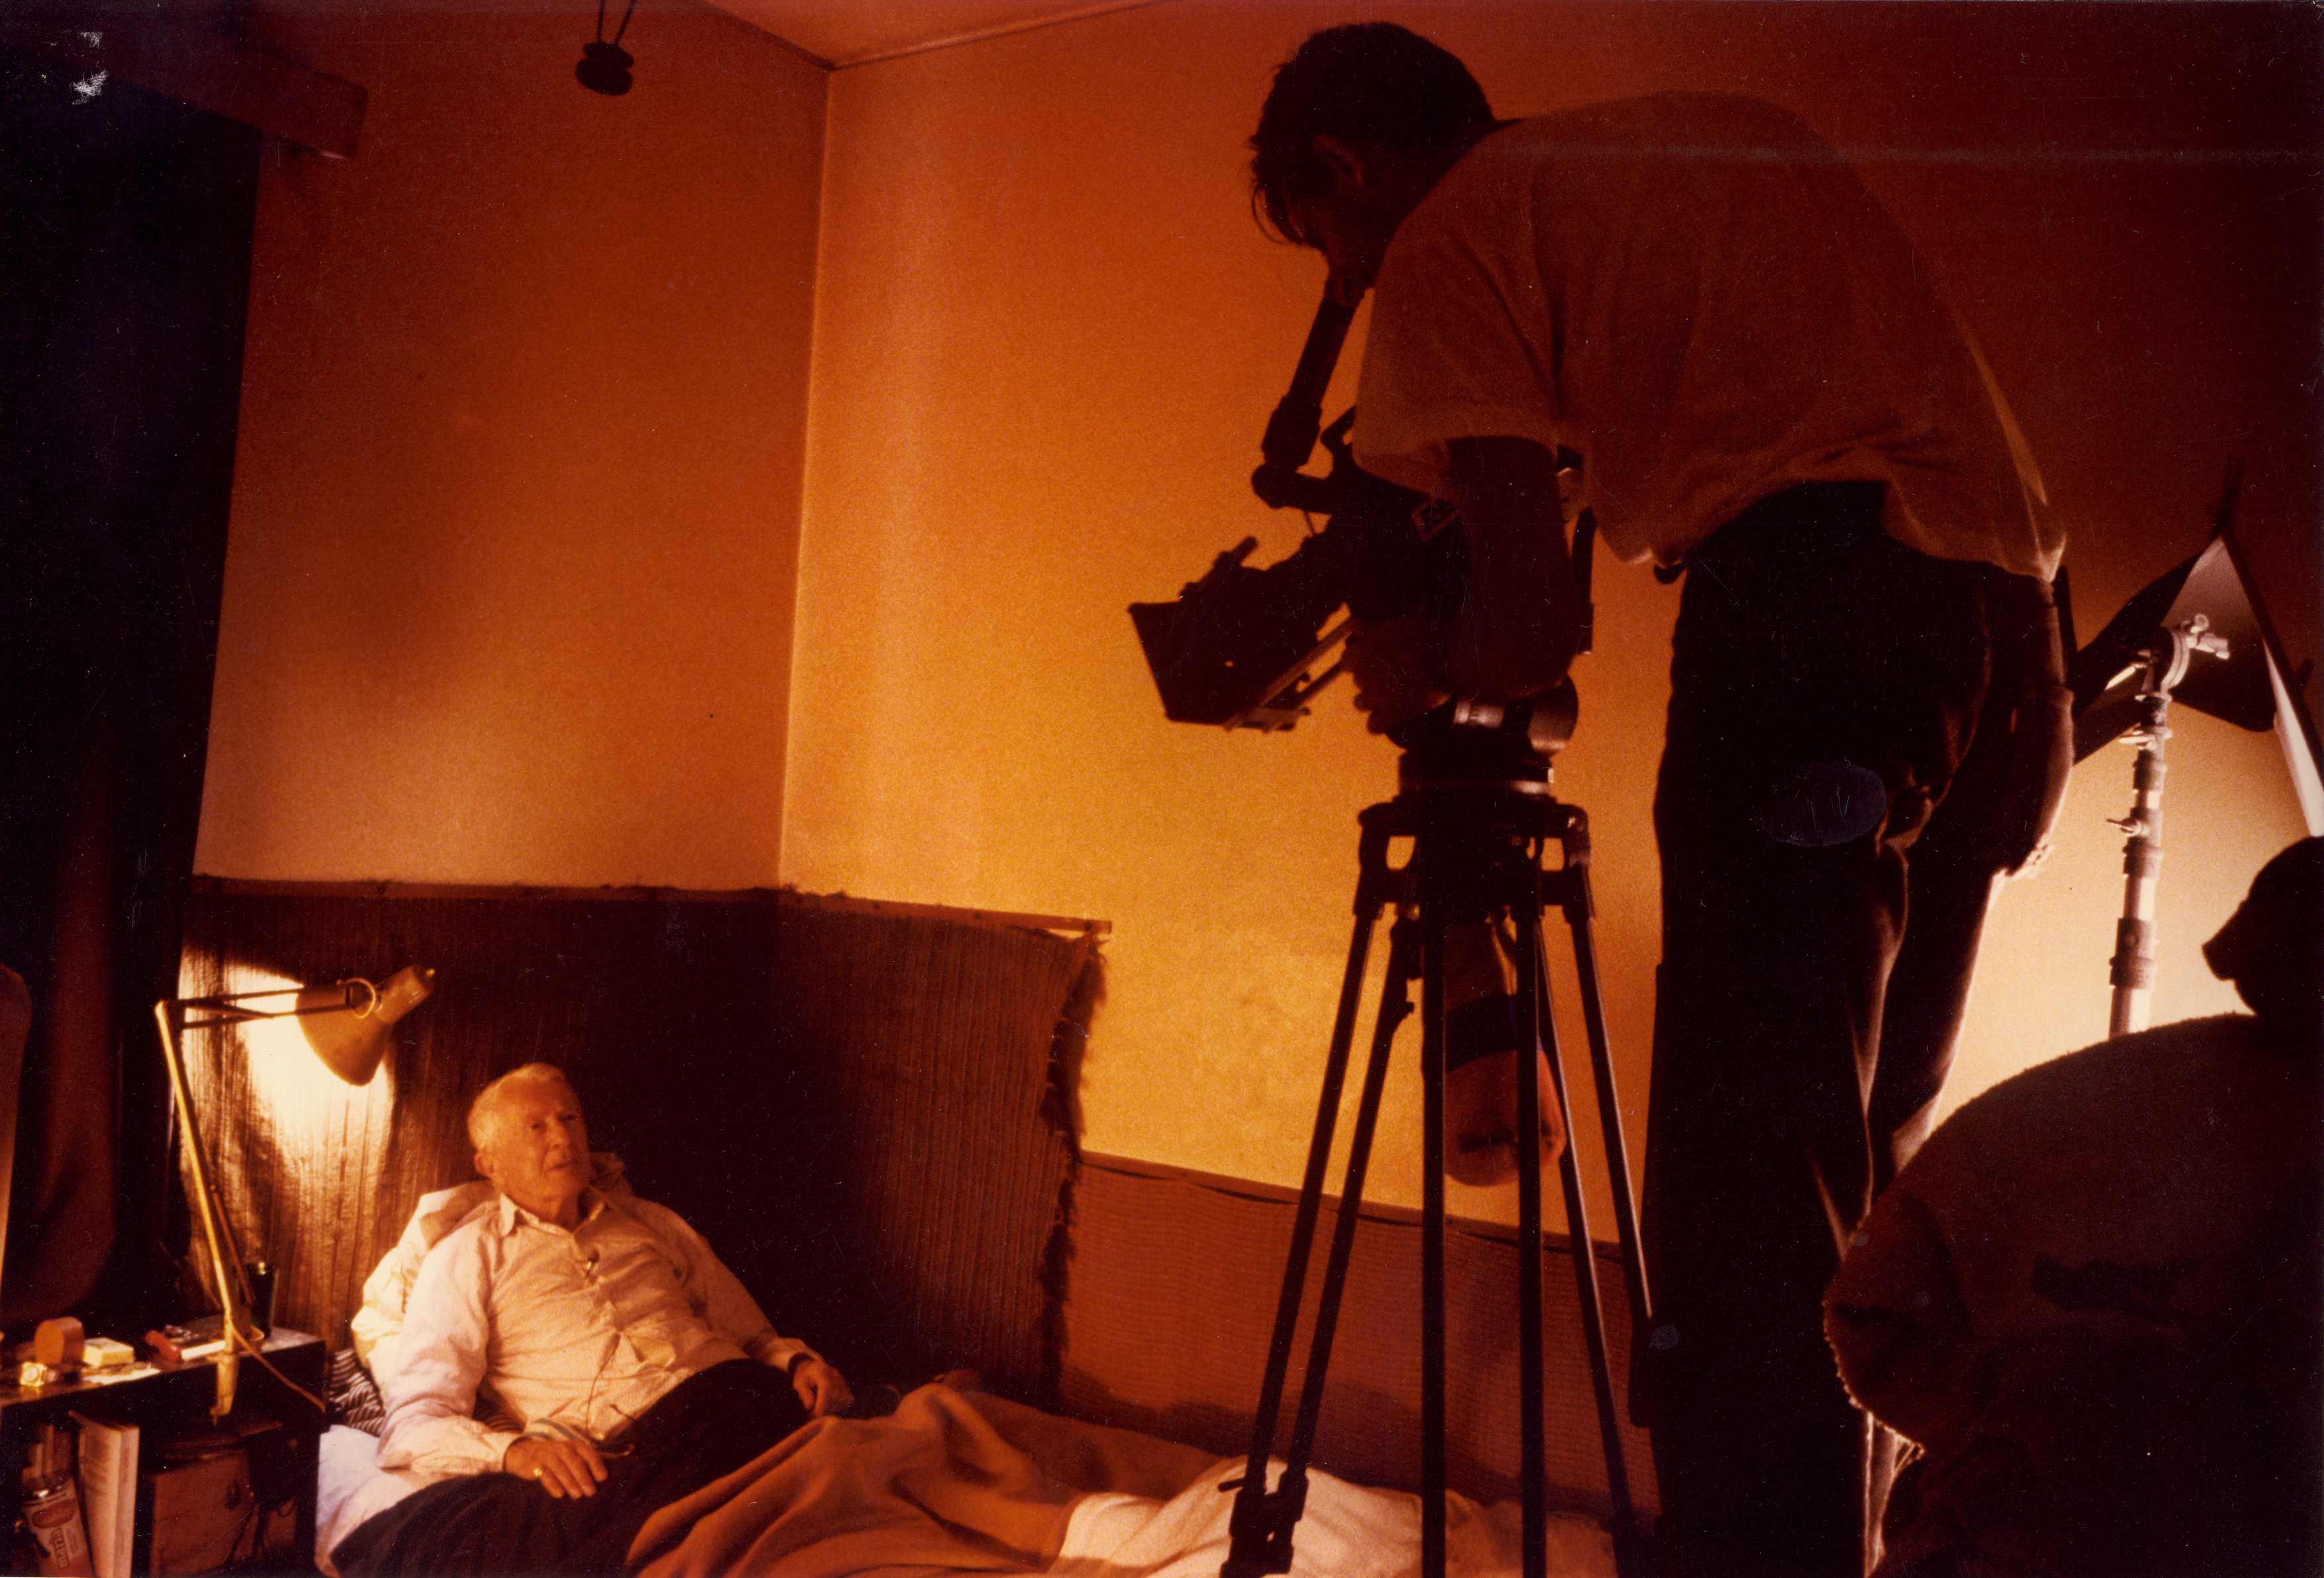 Paolo Ferrari shooting a Documentary whit Paul Bowels in Tanger 1991